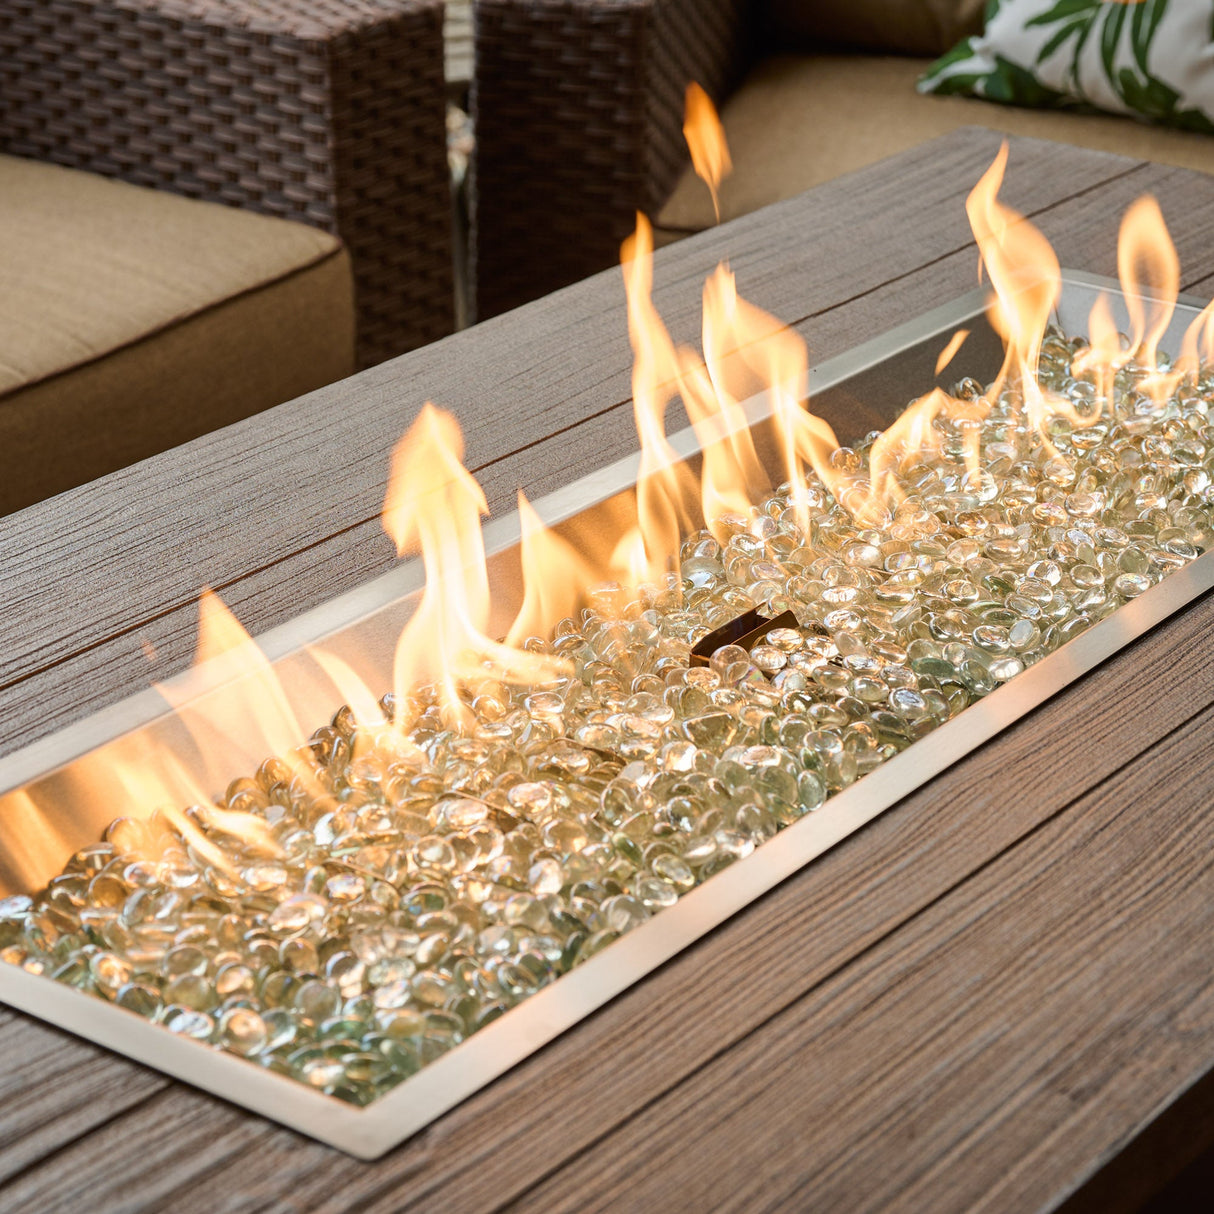 A close up of the flame coming from the burner of a Havenwood Linear Gas Fire Pit Table with a Driftwood top and Luverne Black base